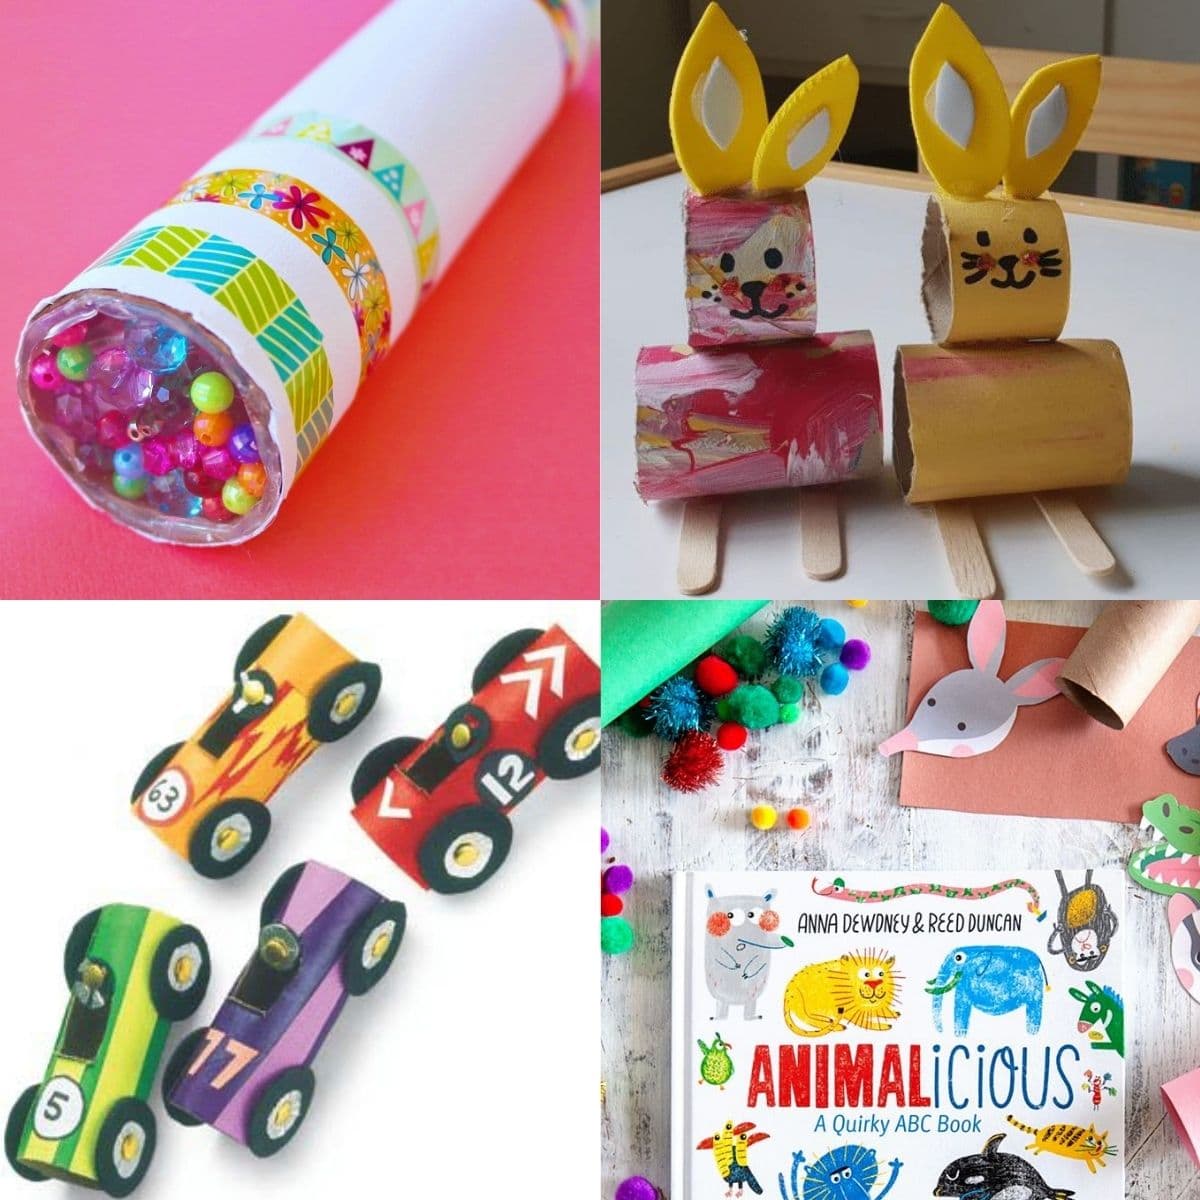 20 Paper Roll Crafts Towel And Toilet Craftsy Hacks